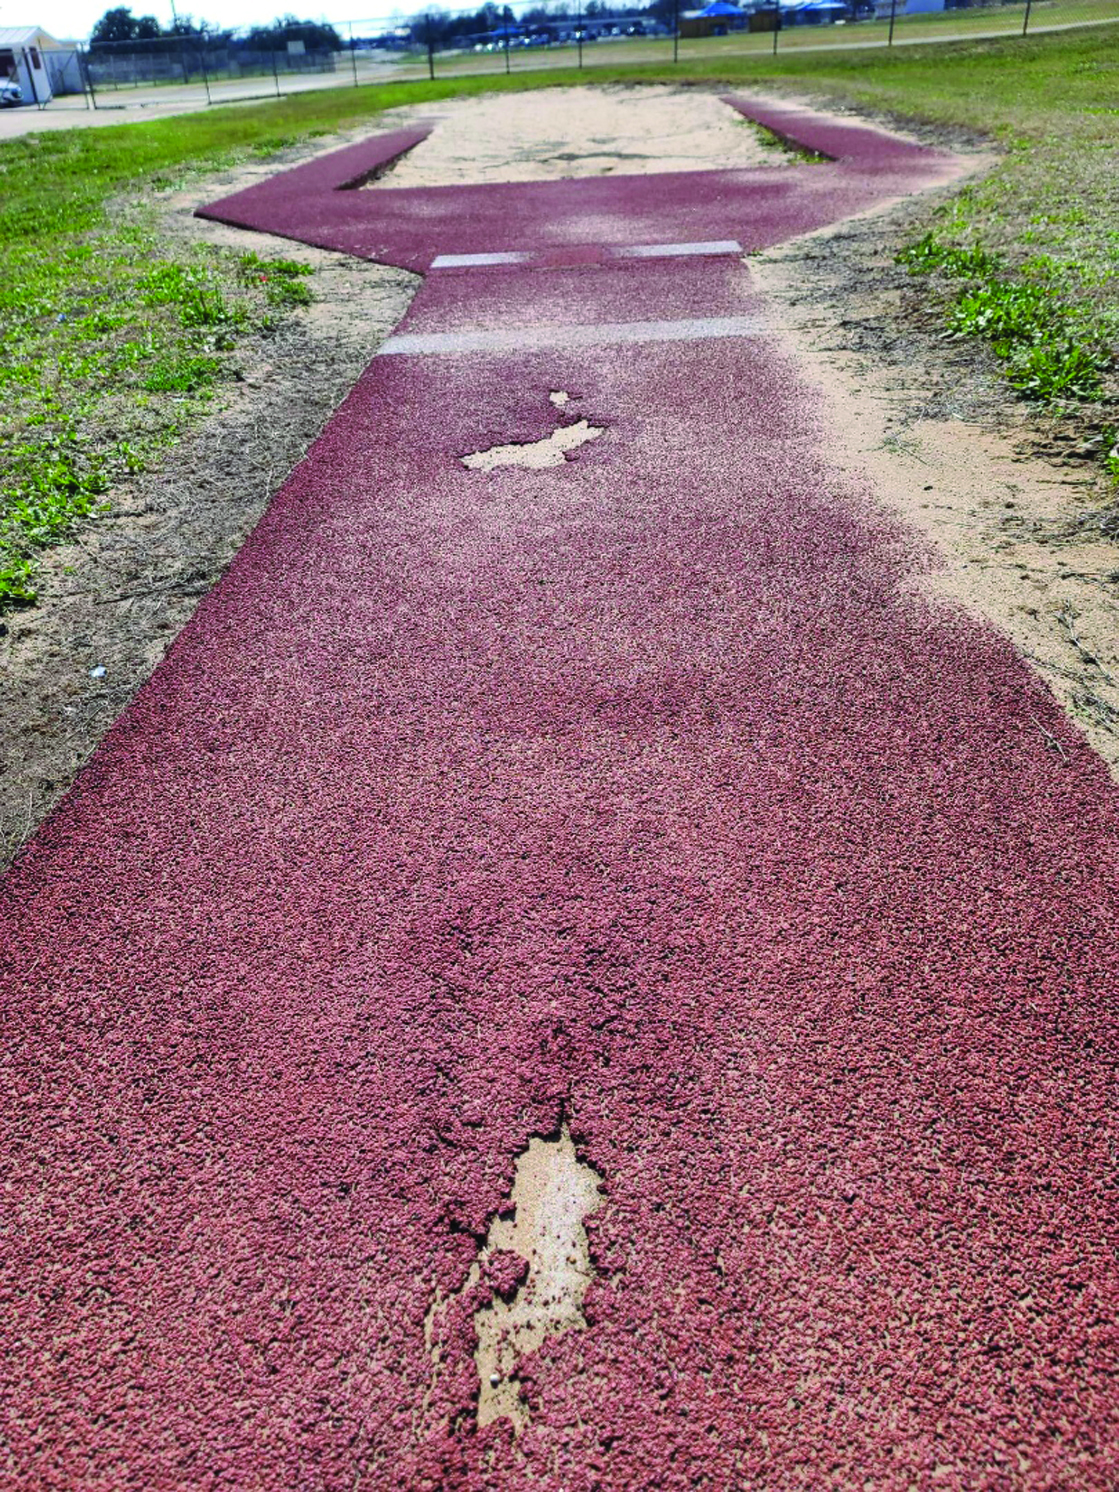 Urgent track repairs at Devine High approved by school board